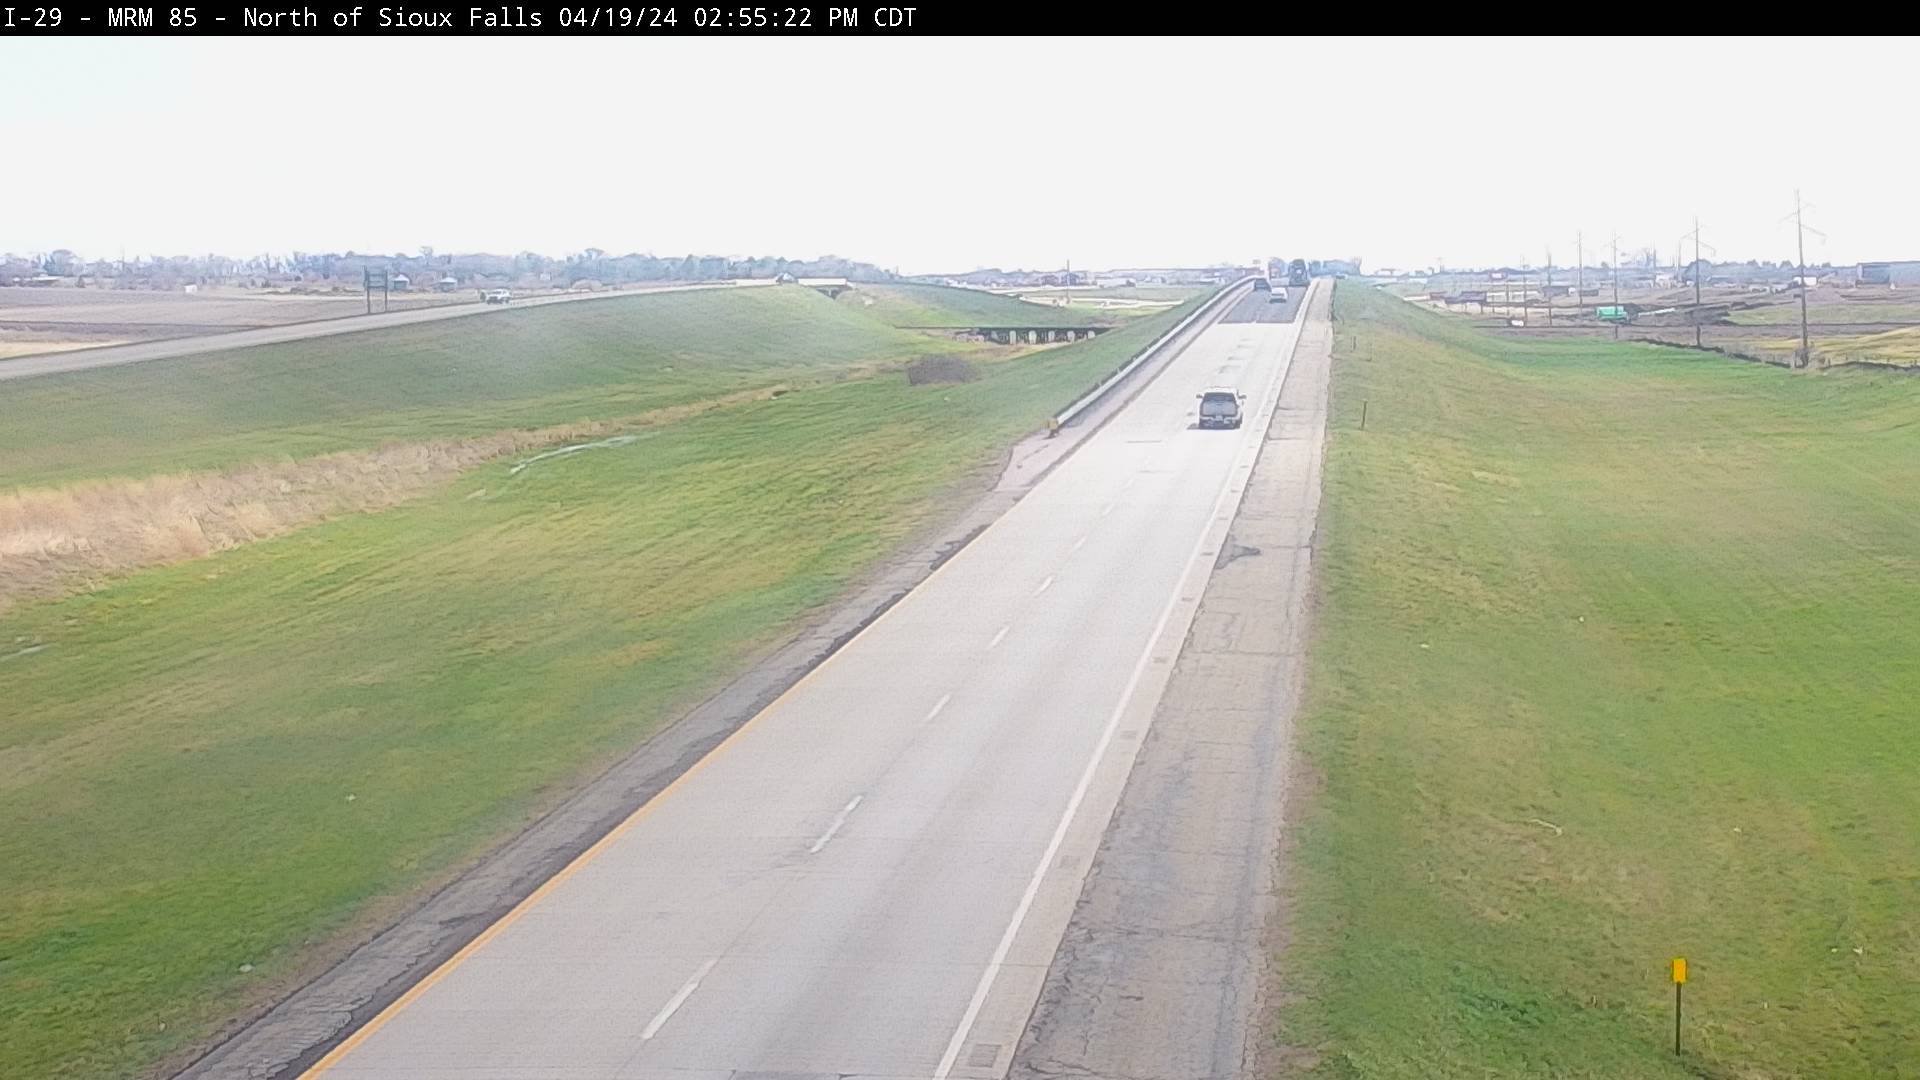 Traffic Cam North of town along I-29 @ MP 85.3 - South Player